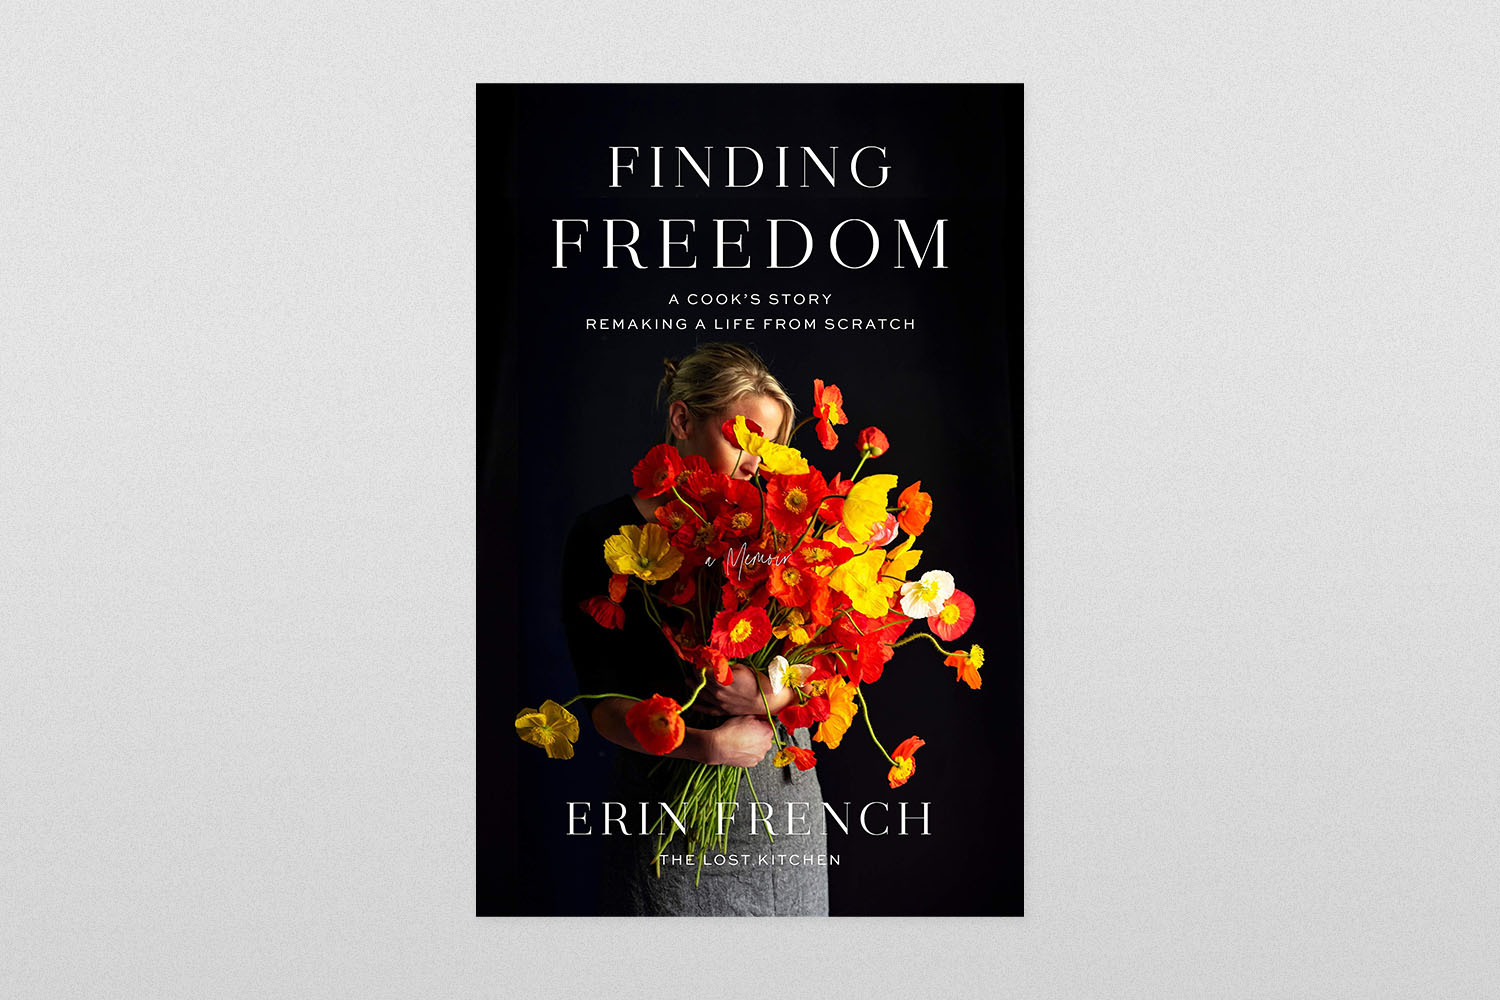 "Finding Freedom"